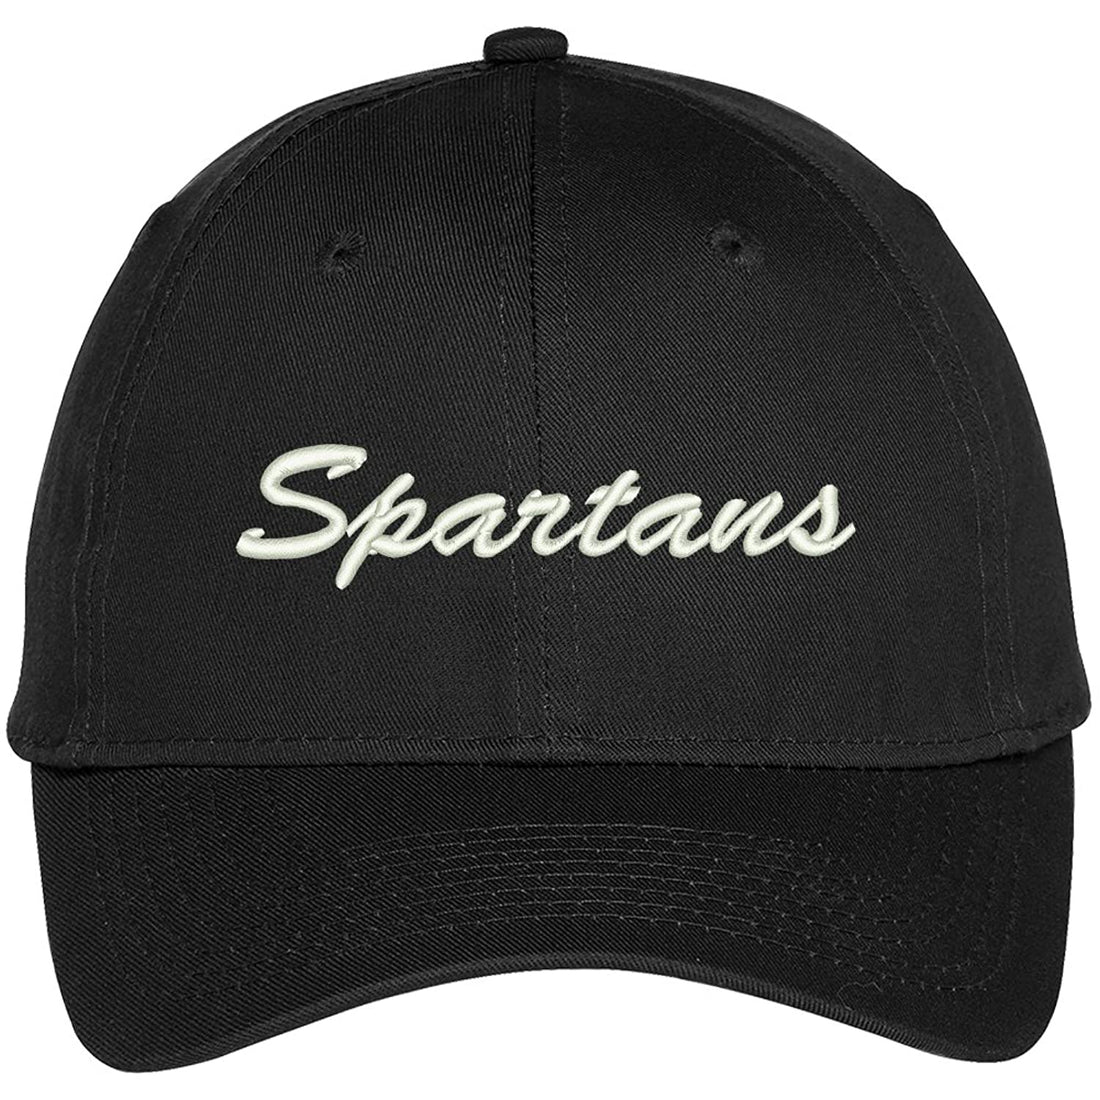 Trendy Apparel Shop Spartans Embroidered Team Nickname Mascot Cap